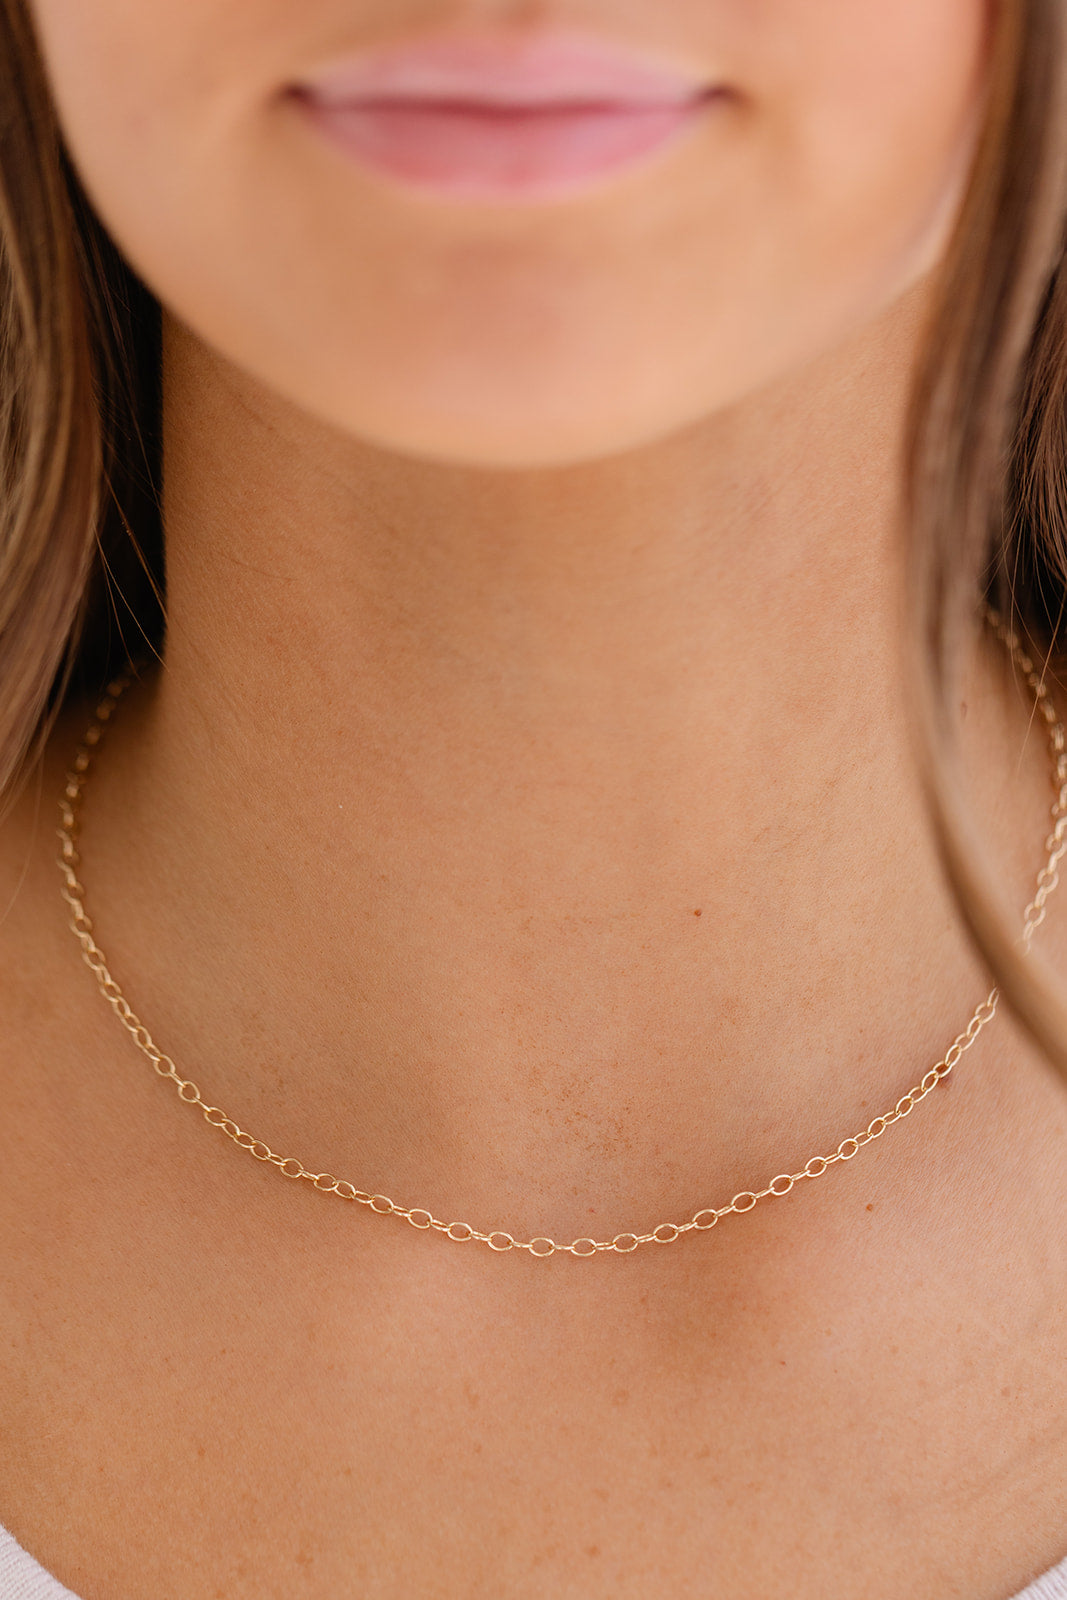 Permanent Gold Chain Necklace